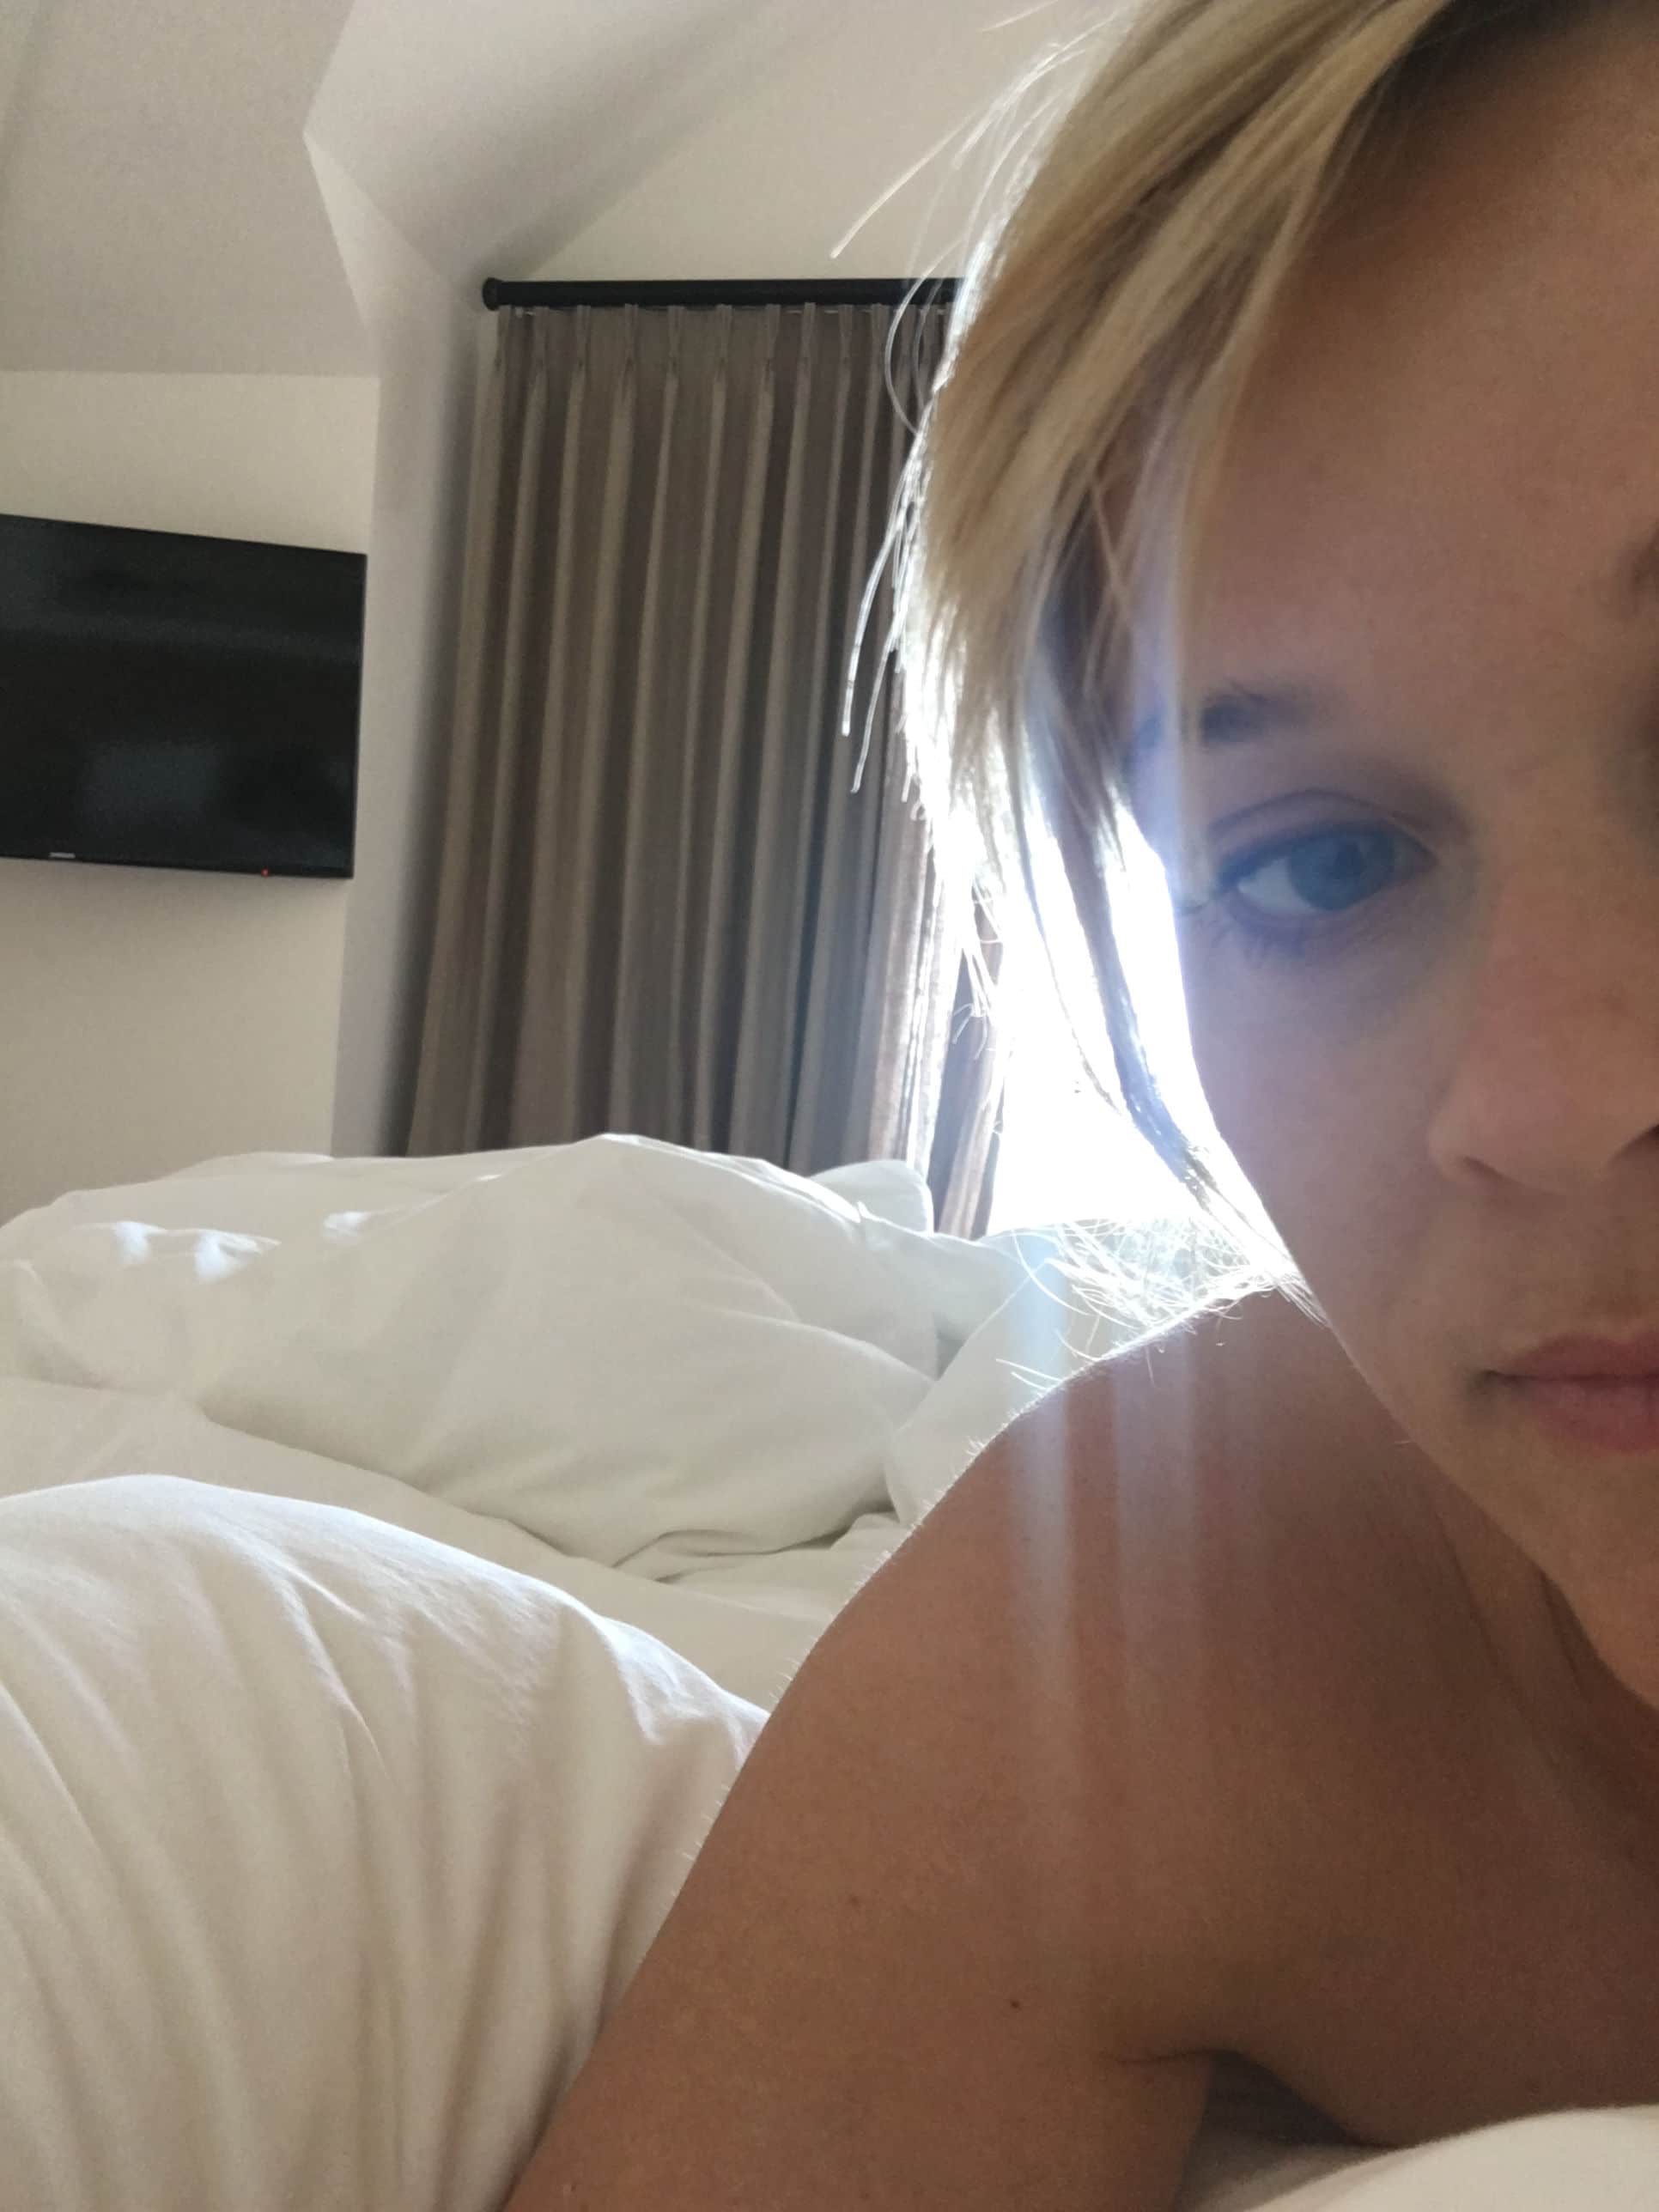 Reese Witherspoon topless leak